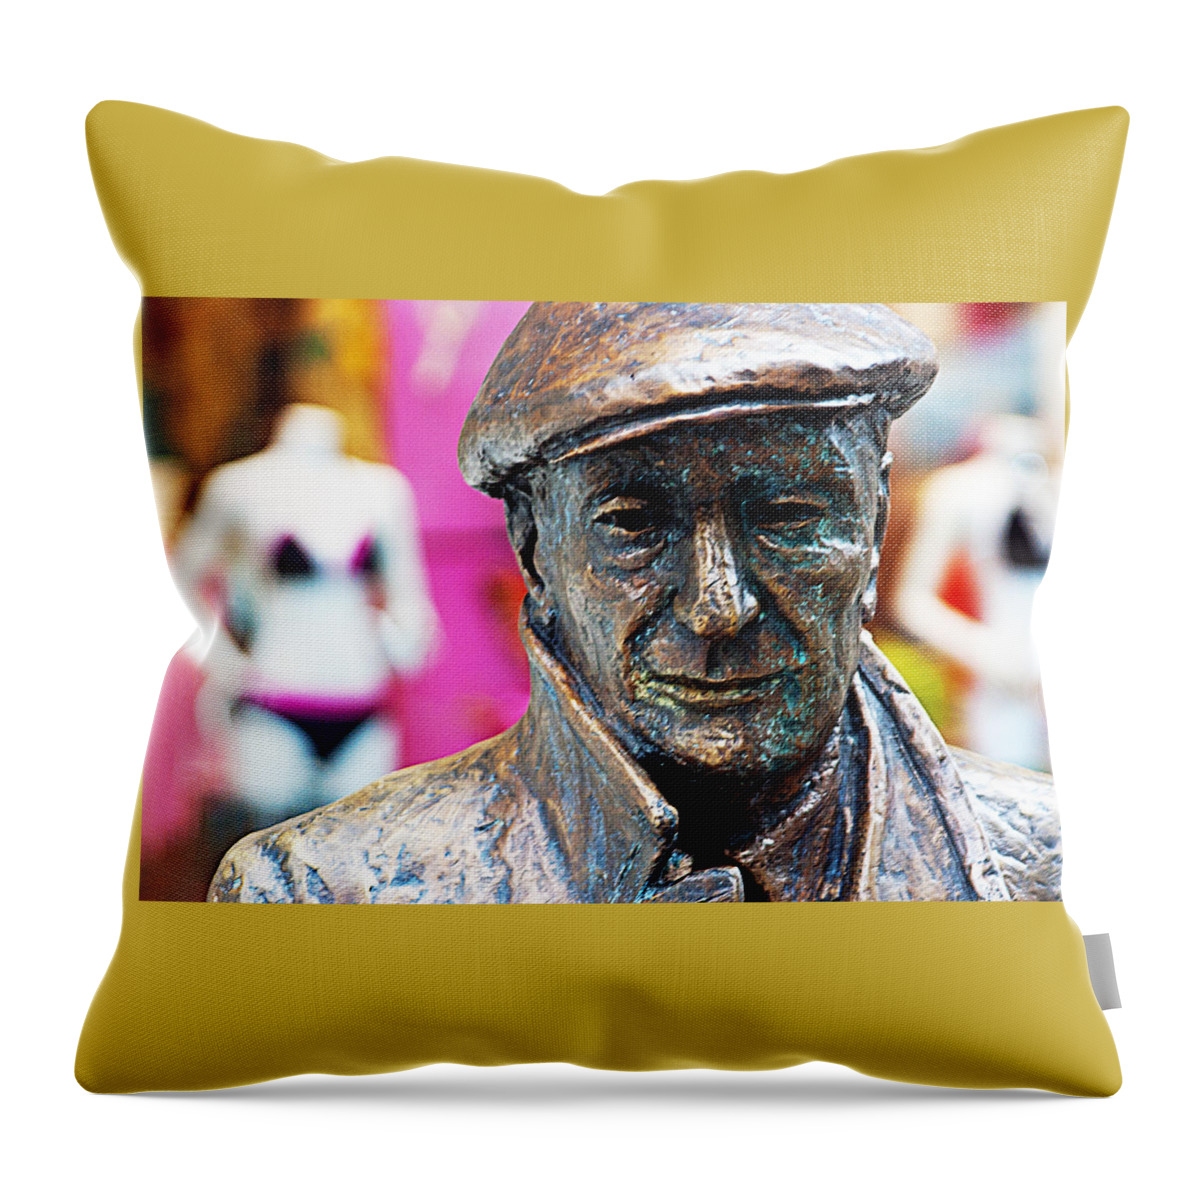 Figurative Photographs Throw Pillow featuring the digital art Behind You by David Davies